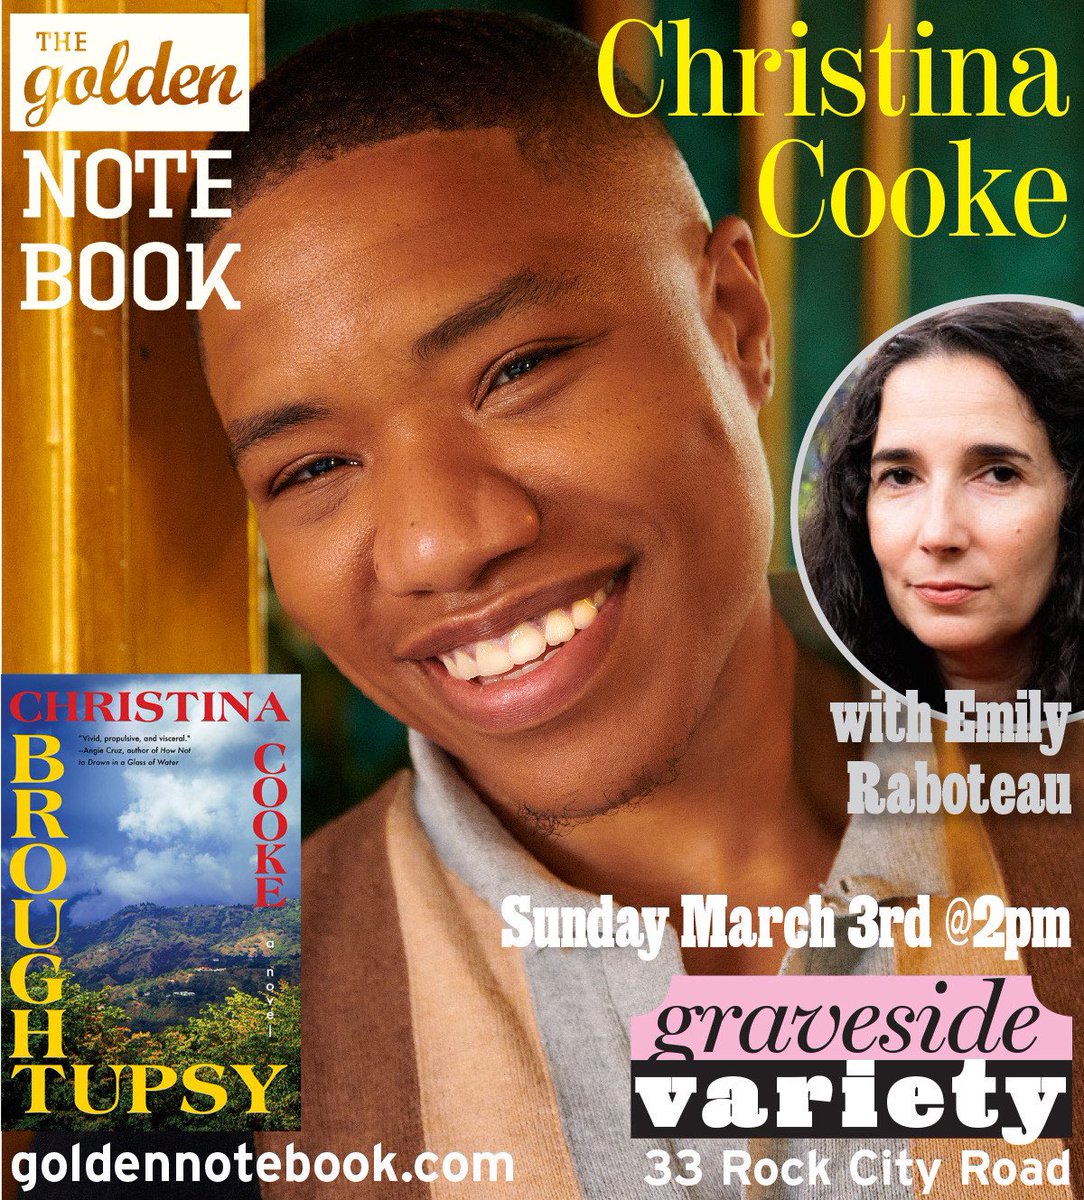 SUNDAY, MARCH 3, 2PM — join me & the splendid @emilyraboteau as we talk cultural strife & family fault lines as seen in BROUGHTUPSY. Presented by @GoldenNotebook1, we can’t wait to welcome y’all to Graveside Variety for our intimate & lively conversation. See y’all there 🤗